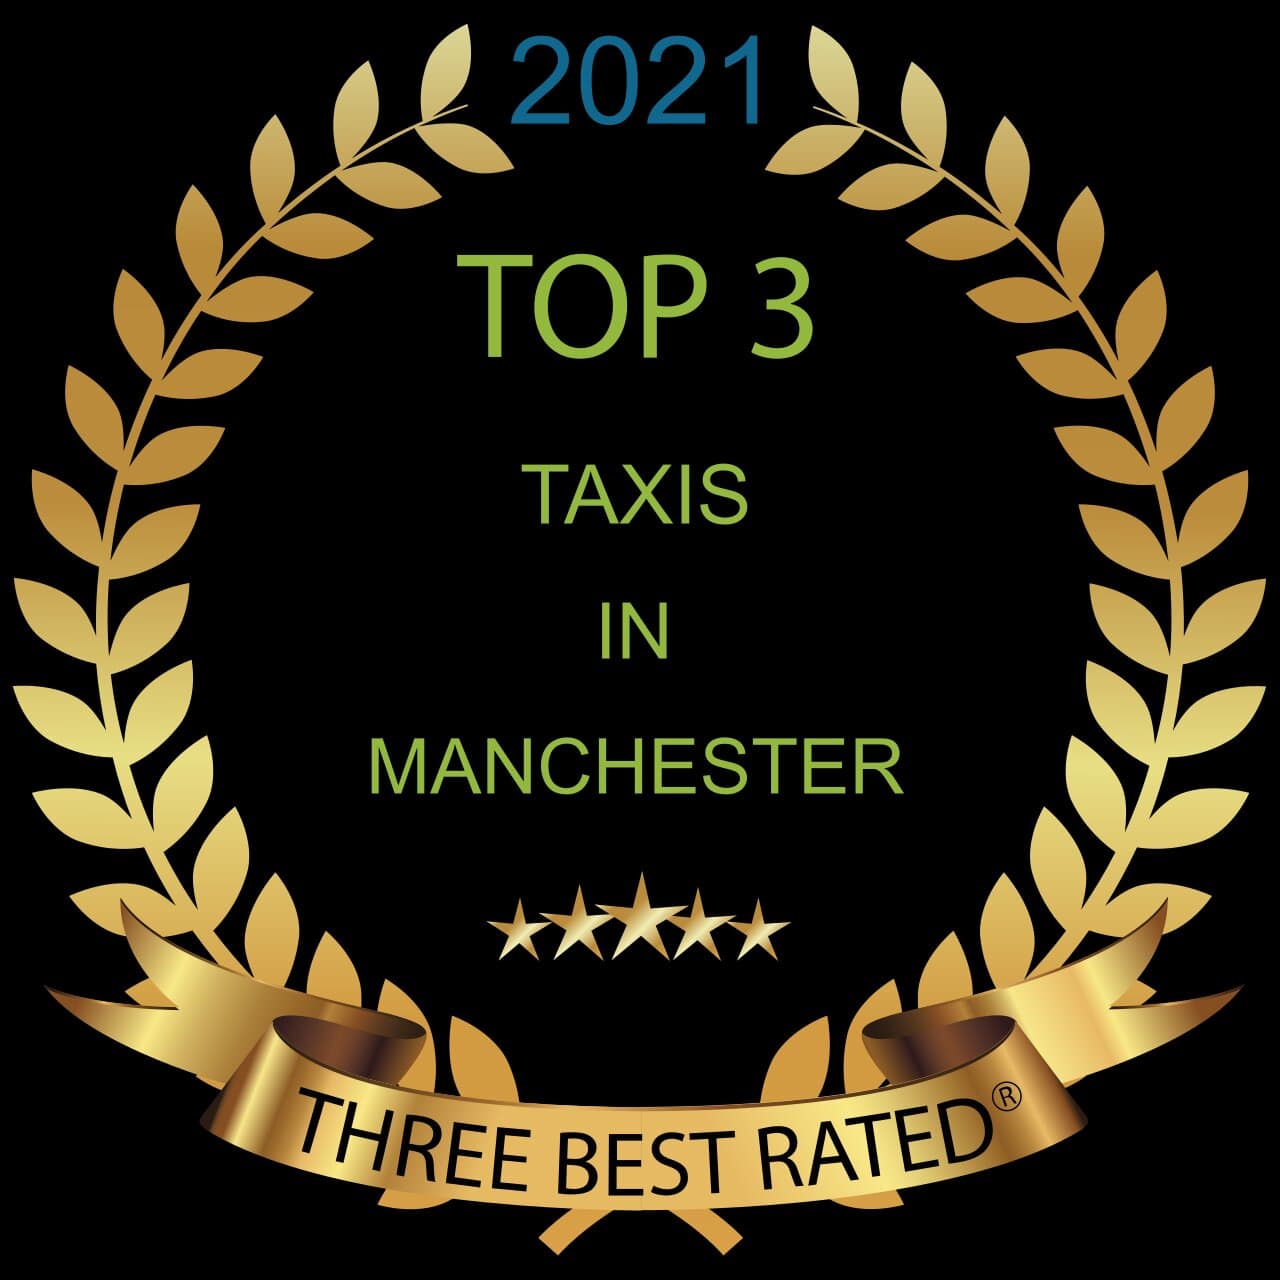 Three best rated taxis manchester